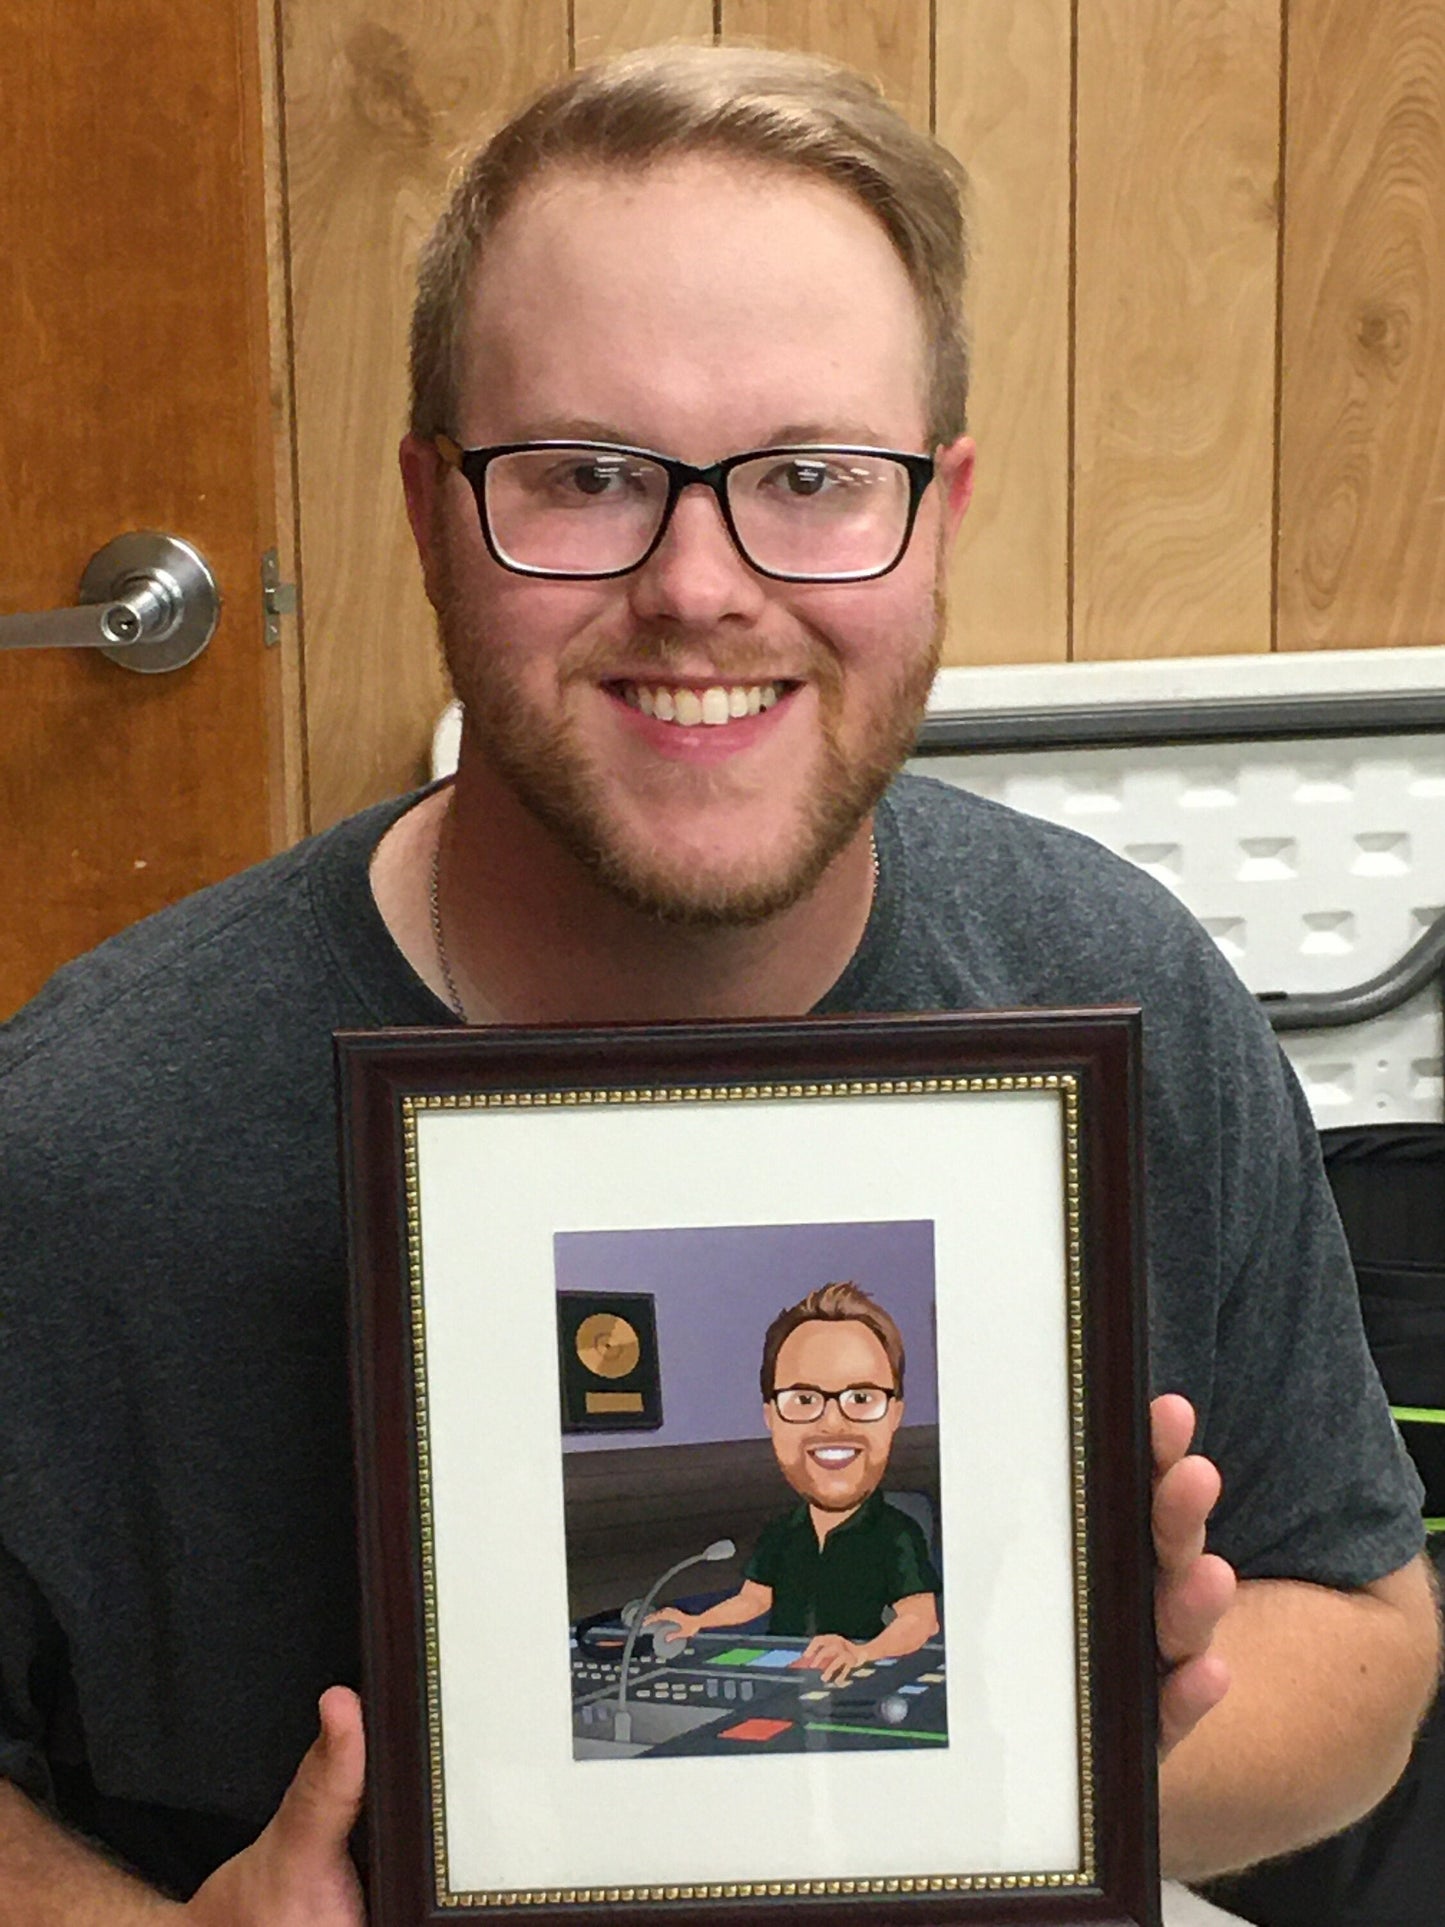 Computer Geek Gift - Custom Caricature Portrait From Your Photo